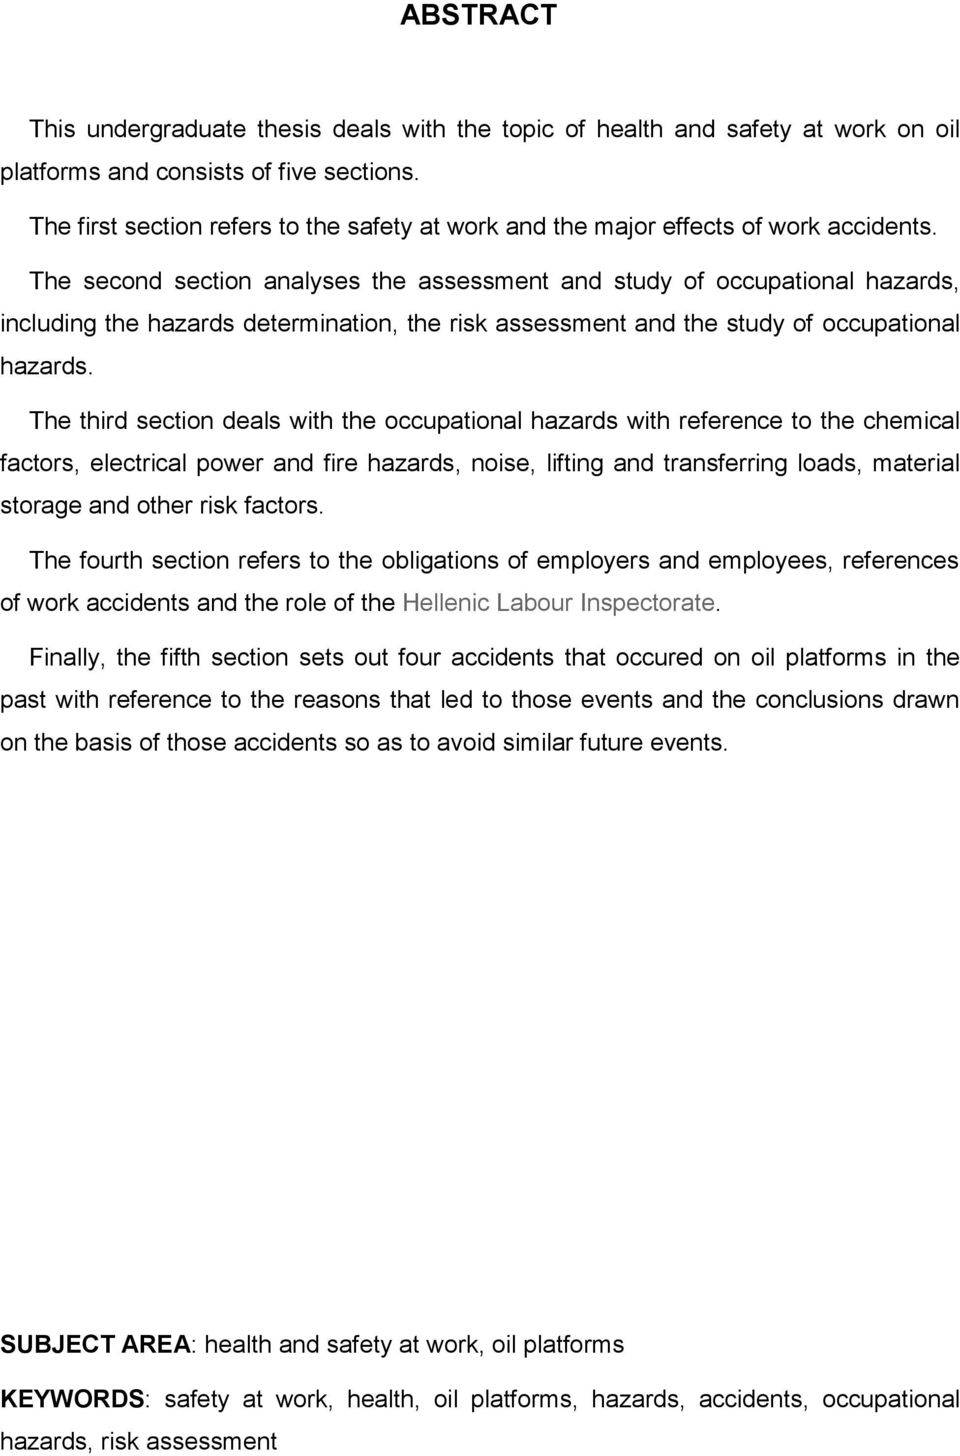 The second section analyses the assessment and study of occupational hazards, including the hazards determination, the risk assessment and the study of occupational hazards.